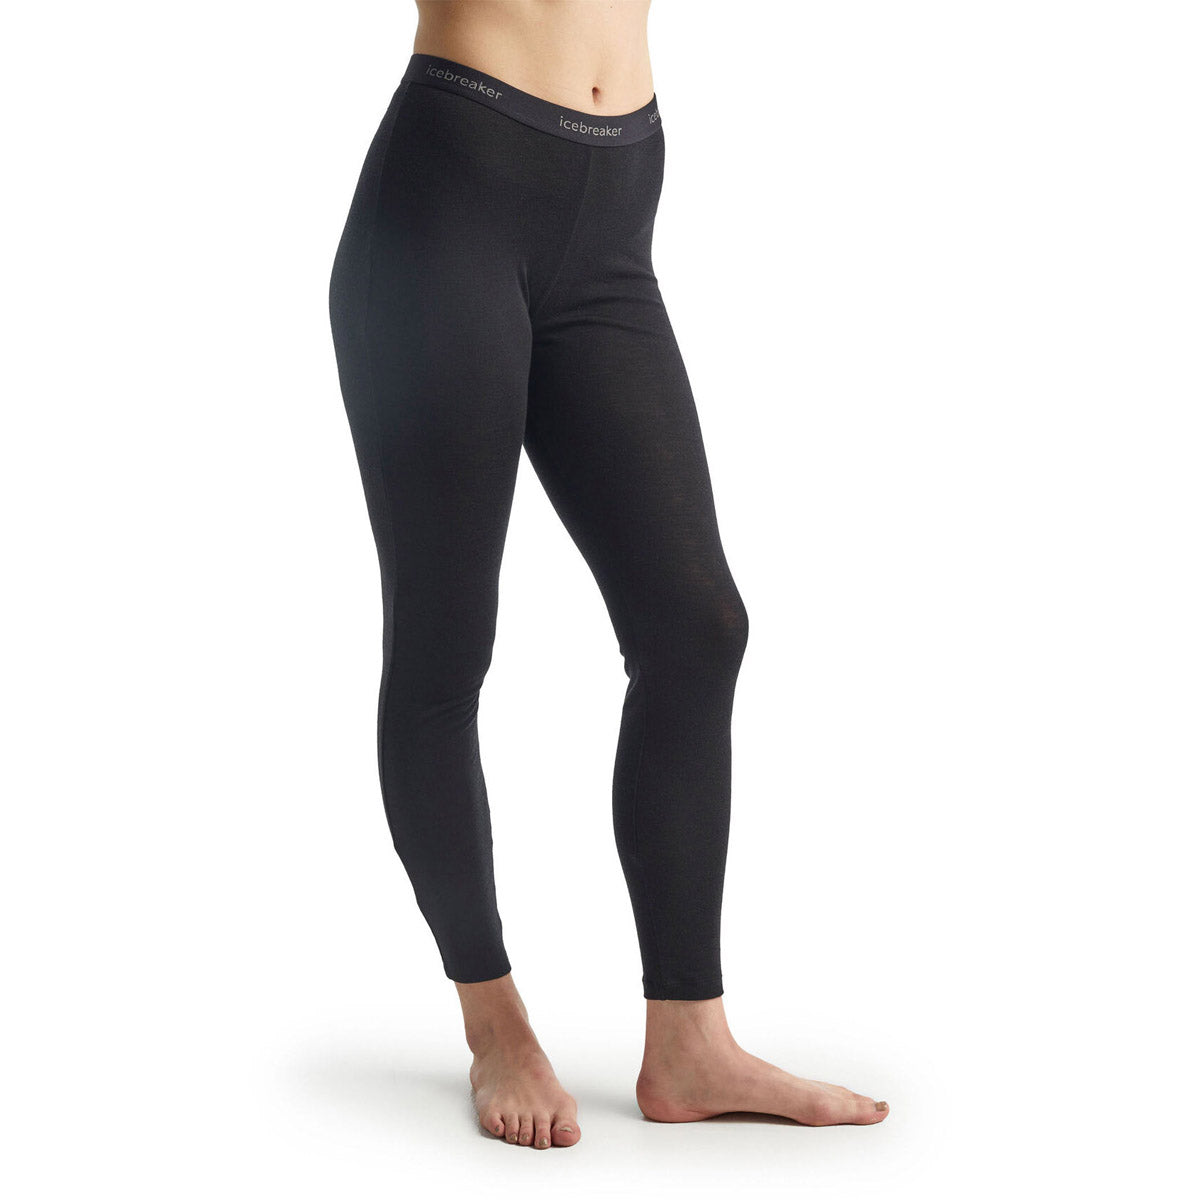 Women's Merino 175 Everyday Thermal Leggings - Gearhead Outfitters